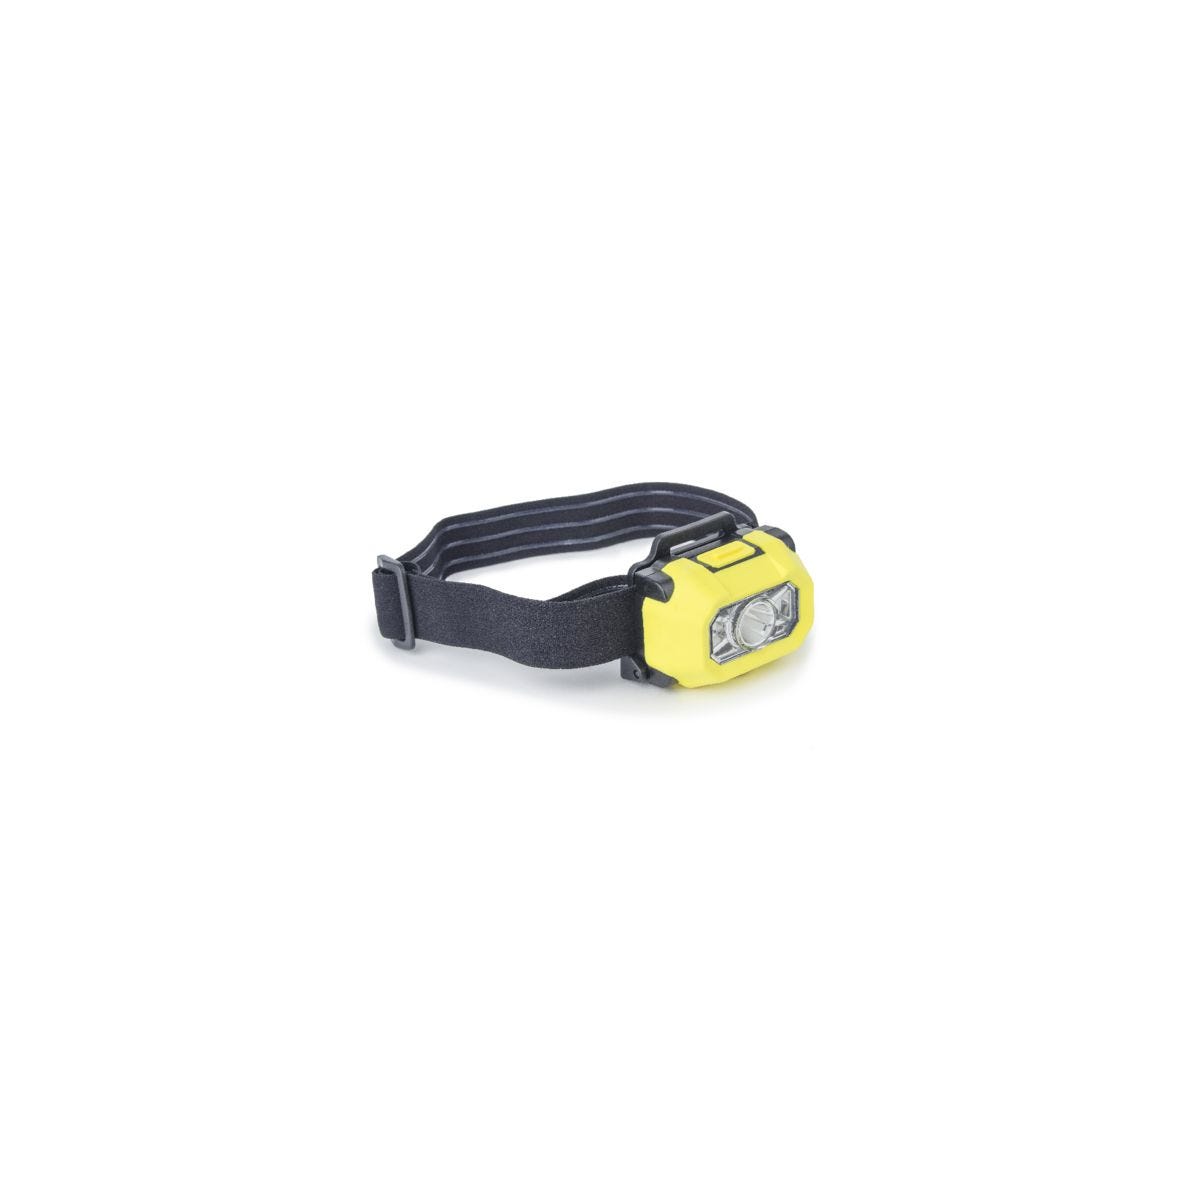 Lampe frontale ATEX LED 150lm,143g - Coverguard 0